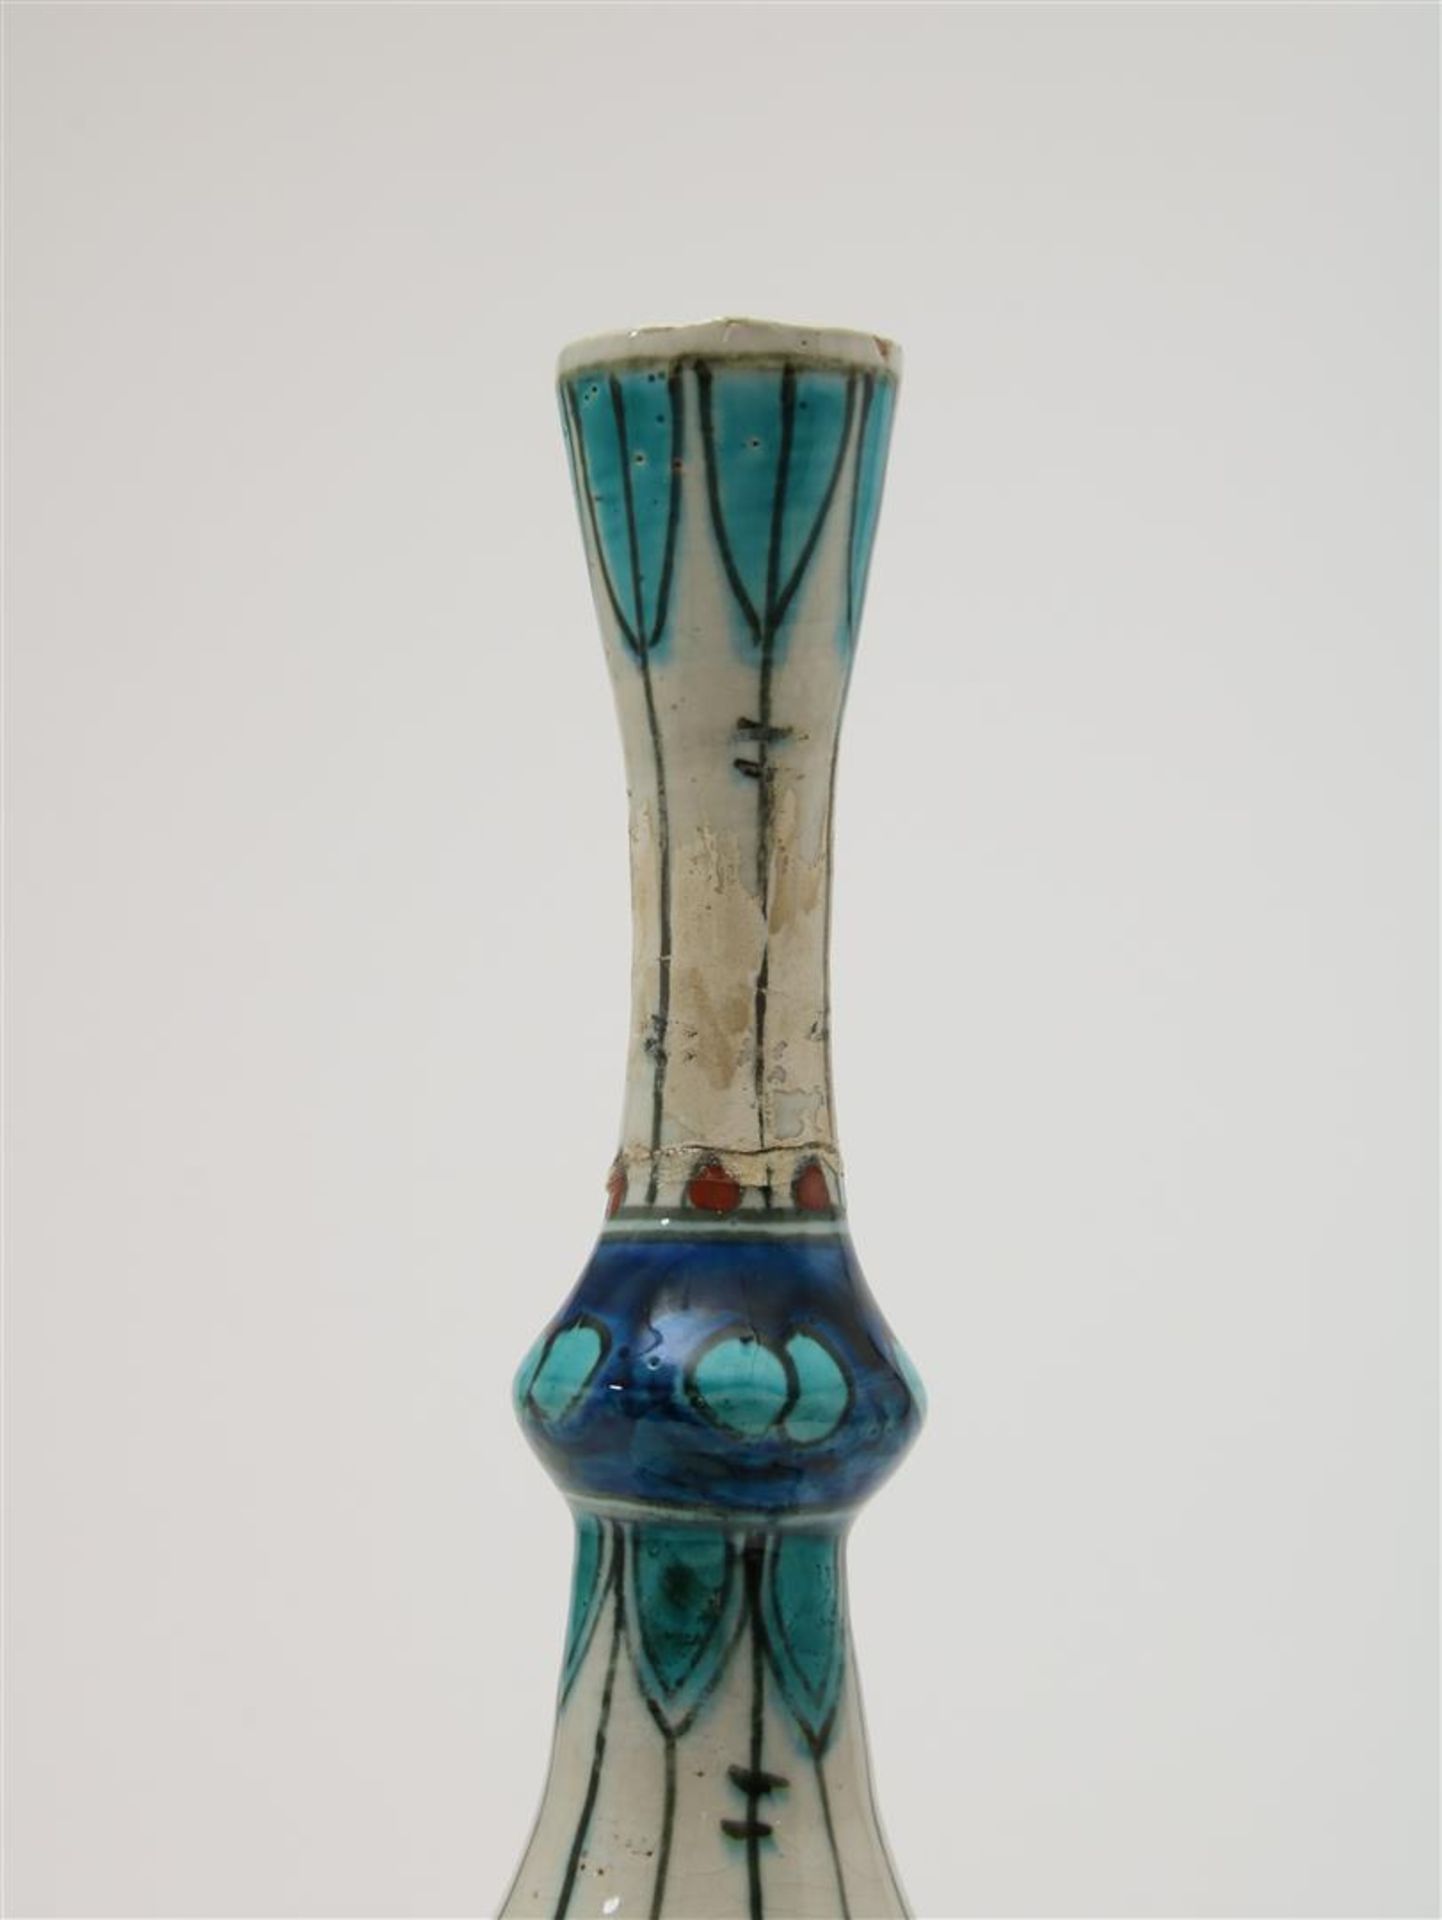 Polychrome earthenware 'New Delft' or 'Iznik' vase with narrow neck and Persian flower decor. - Image 4 of 8